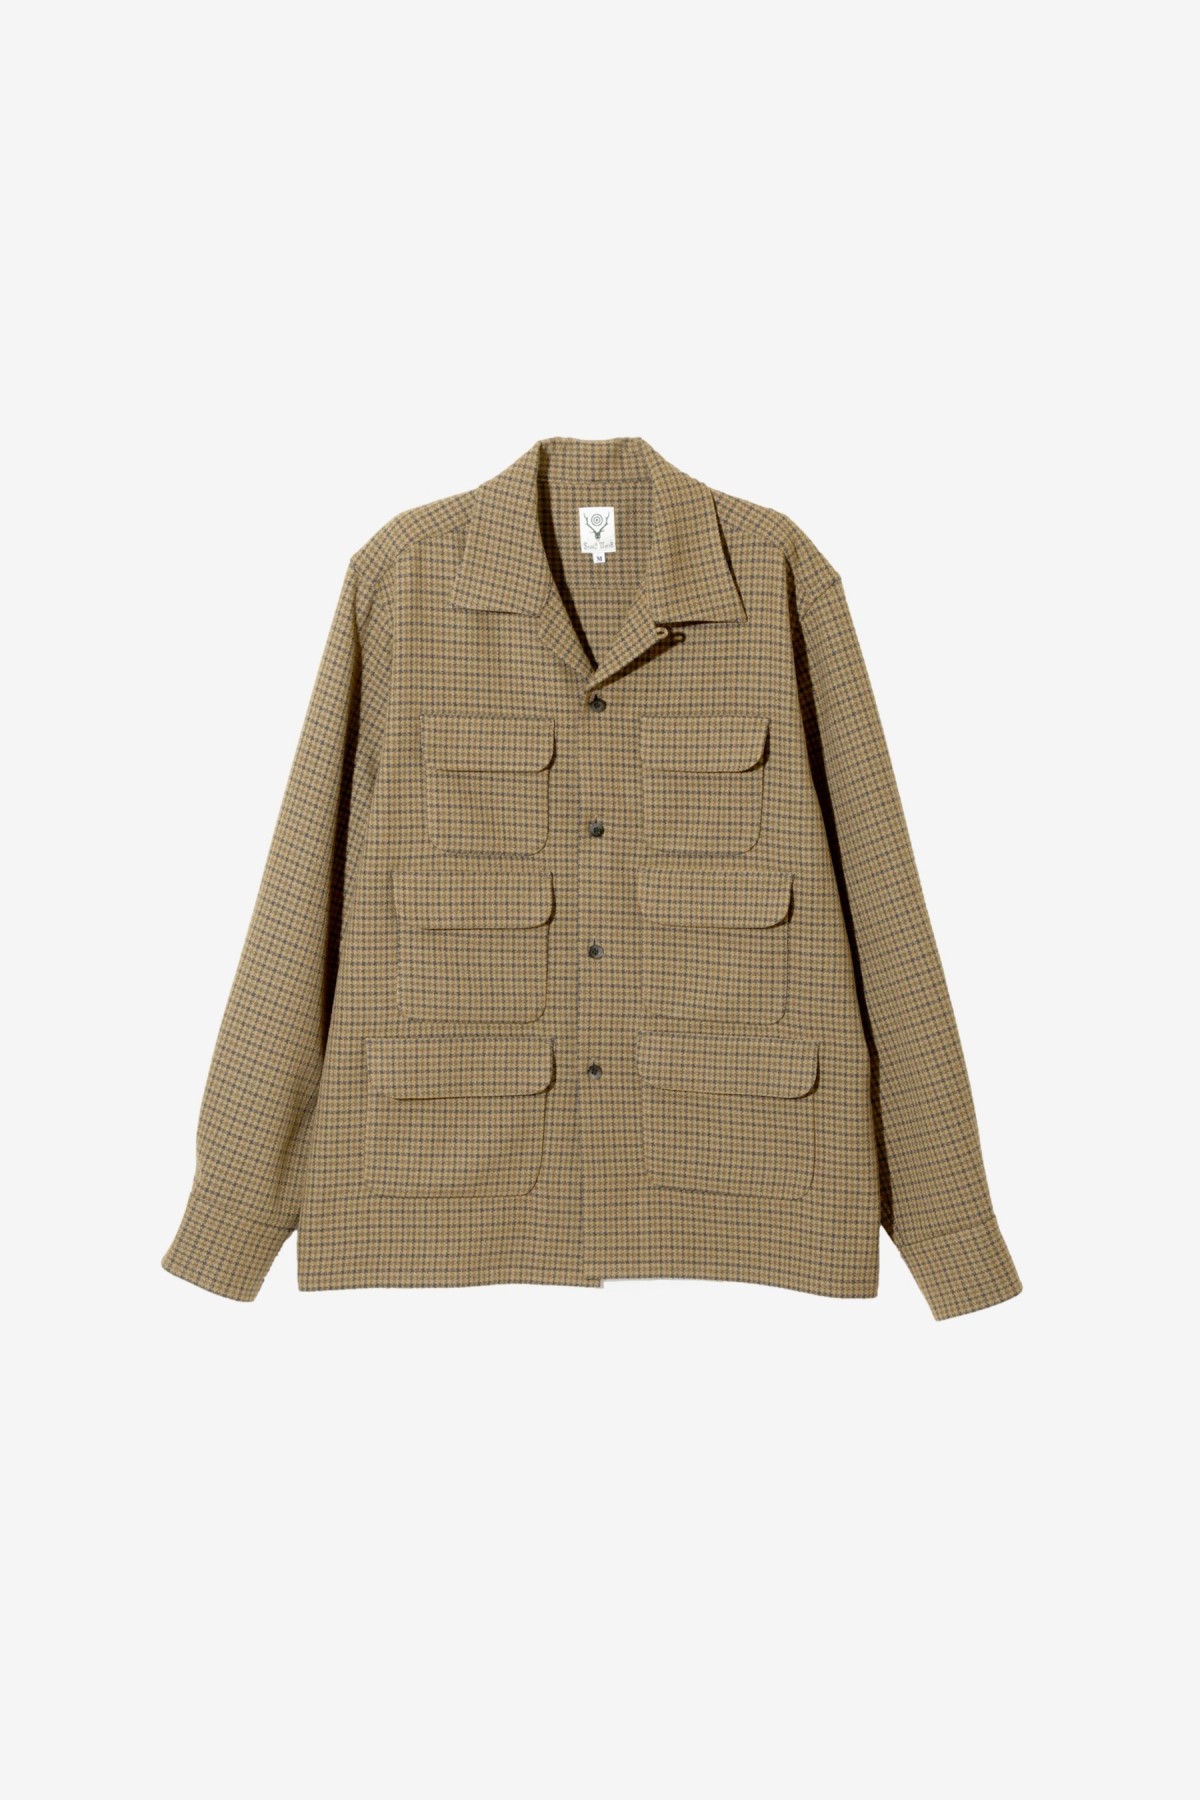 South2 West8 6 Pocket Classic Shirt in Houndstooth Beige/Charcoal